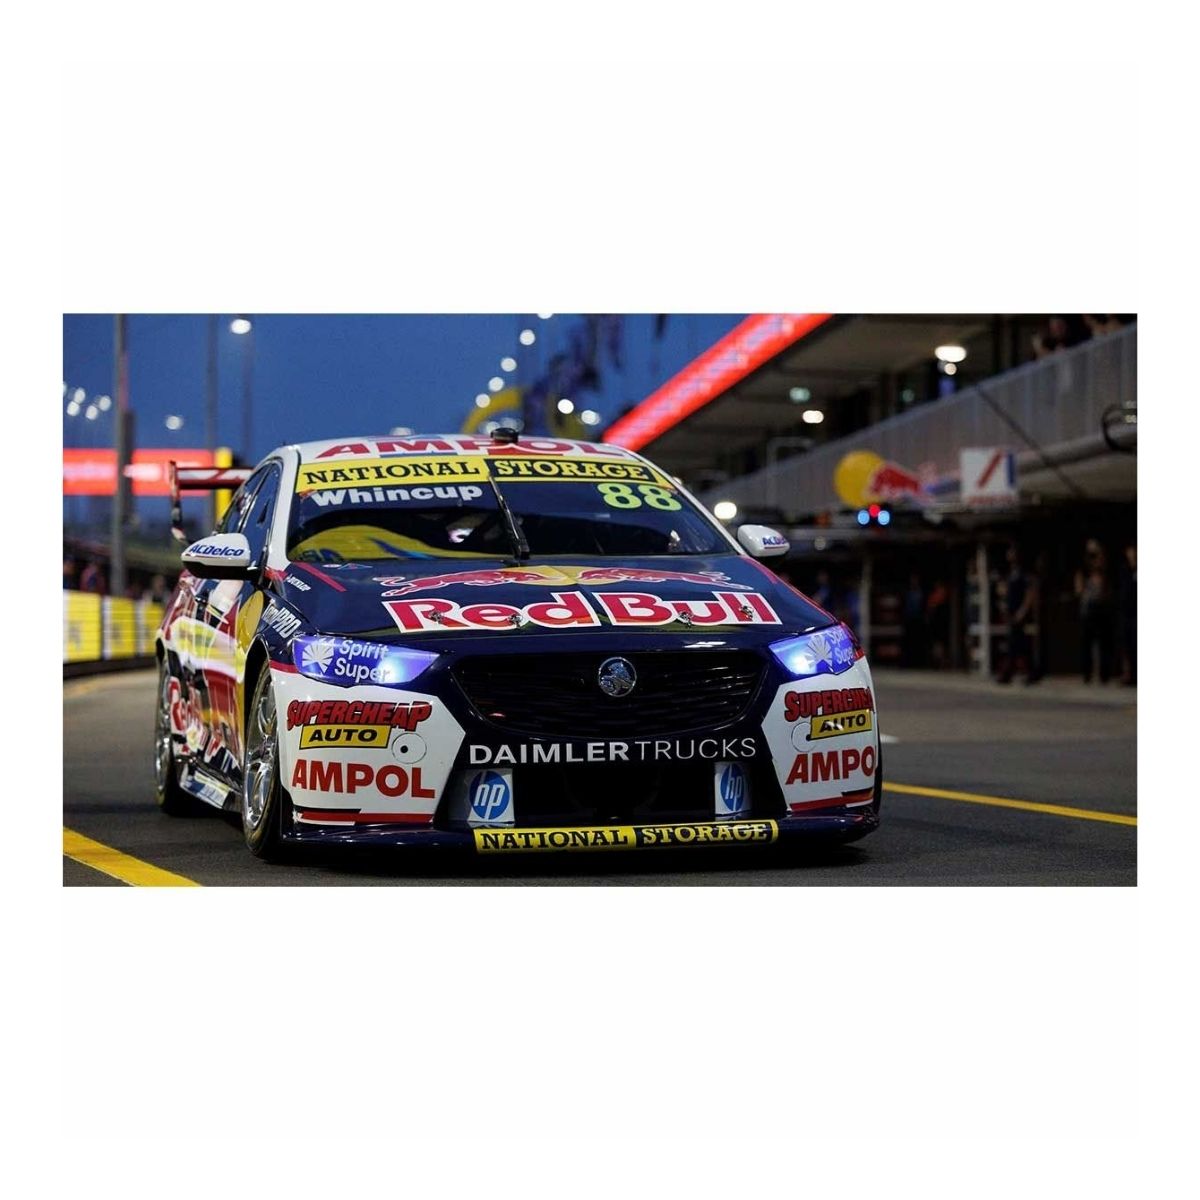 Holden ZB Commodore - Red Bull Ampol Racing #88 - Jamie Whincup - Beaurepairs Sydney Supernight Race 29 - Last Full-Time Solo Drive